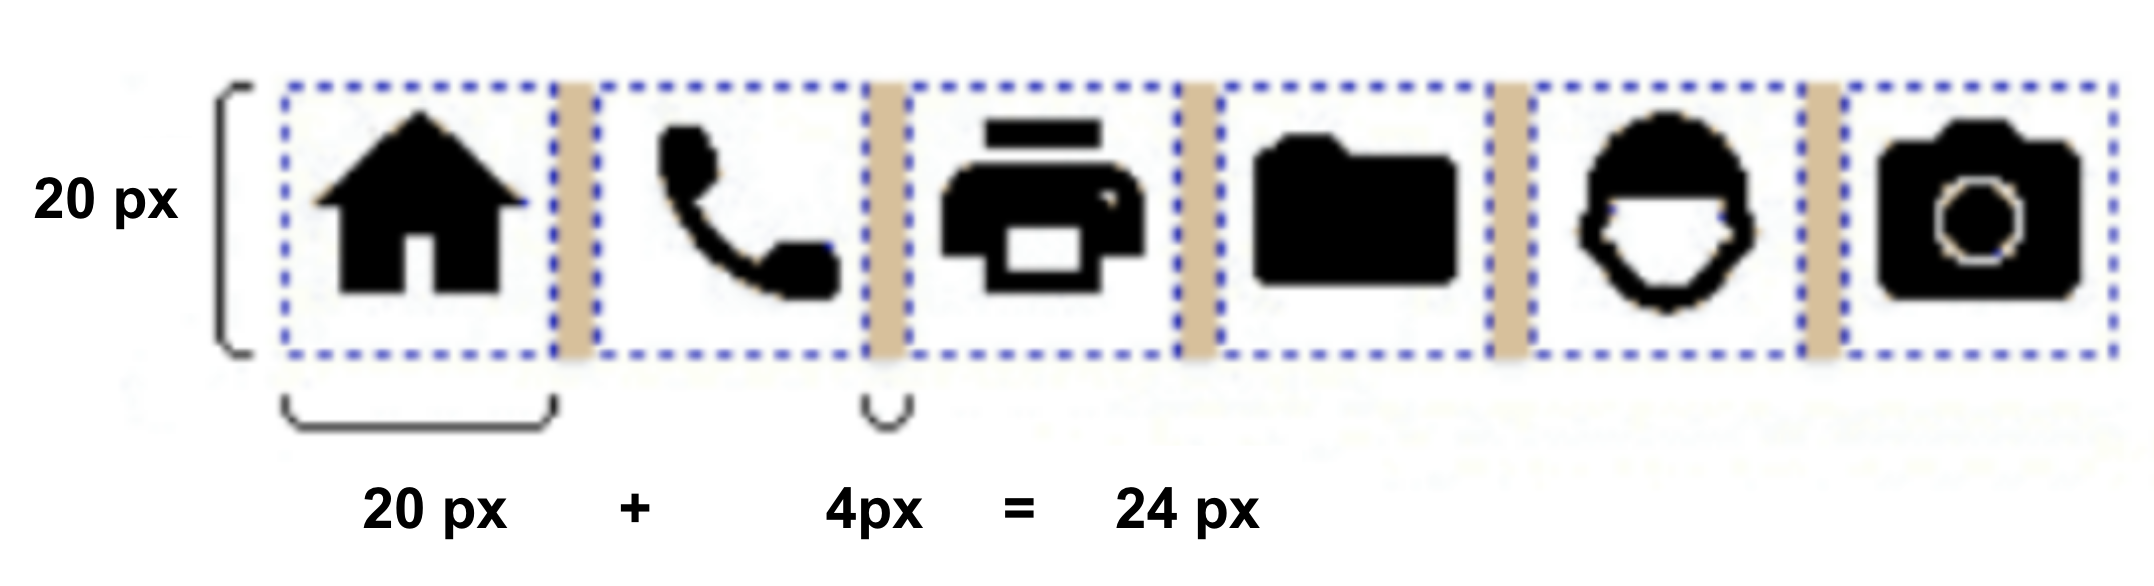 A row of icons with measures showing they are each 20 by 20 pixels wide and high, with 4 pixel spacing between them.